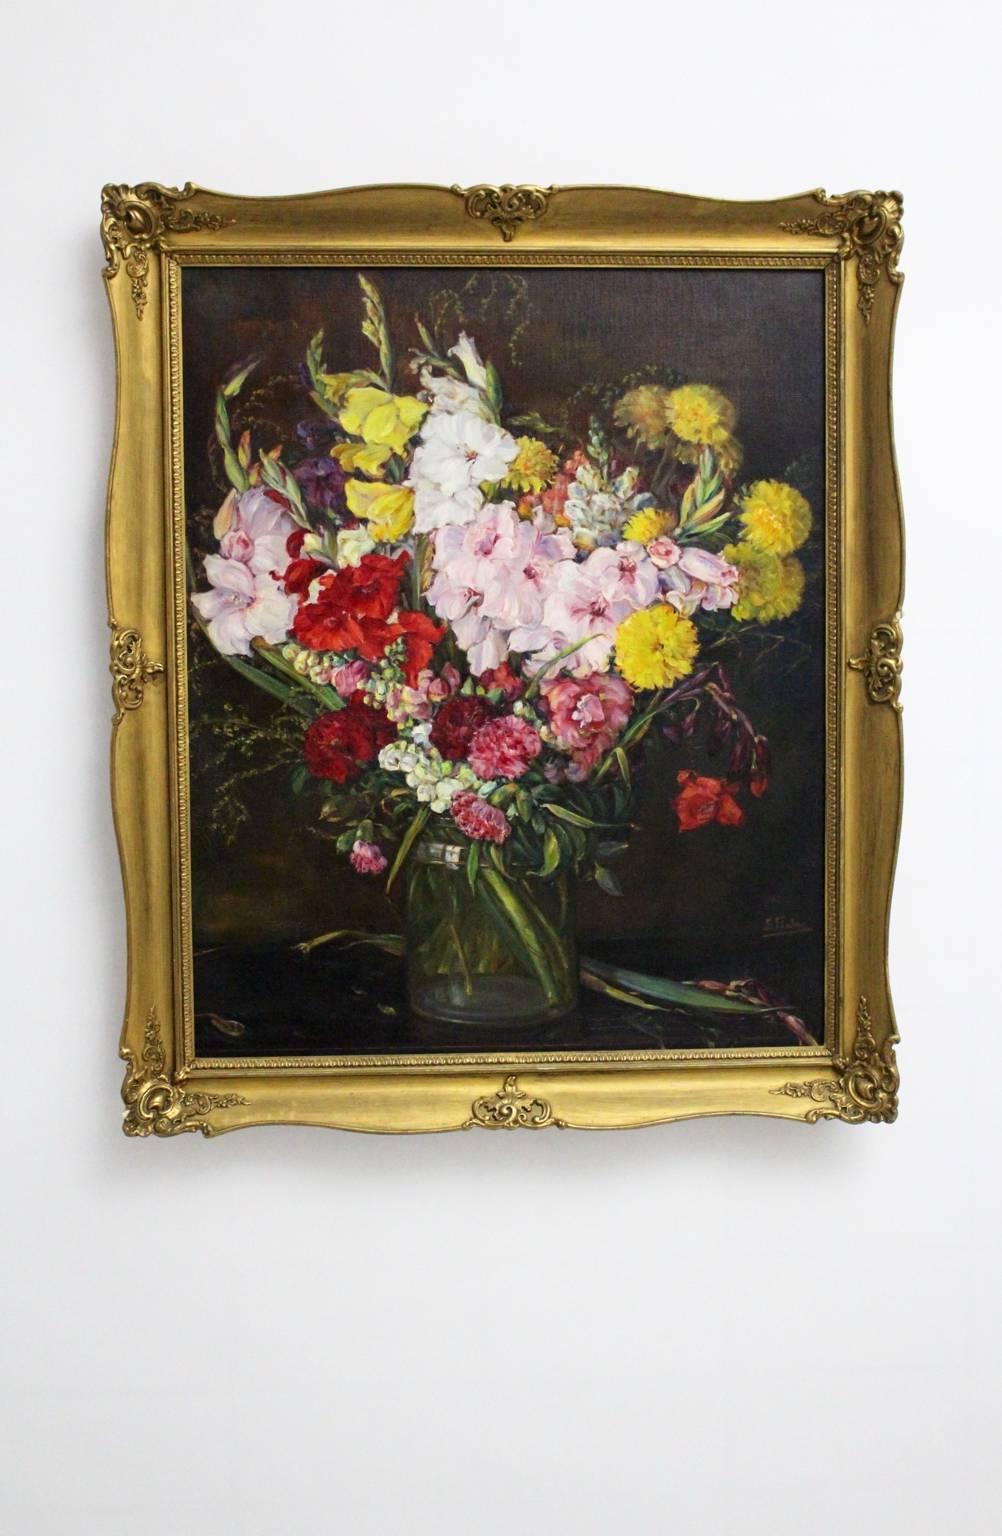 Oil on canvas painting by Emil Fiala (1869-1960) with the motif Gladioli in a glass vase.
Signed by Emil Fiala
Prof. Emil Fiala had many exhibitions and the membership of the Künstlerbund ( formerly Hagenbund ).
This painting is set in a golden